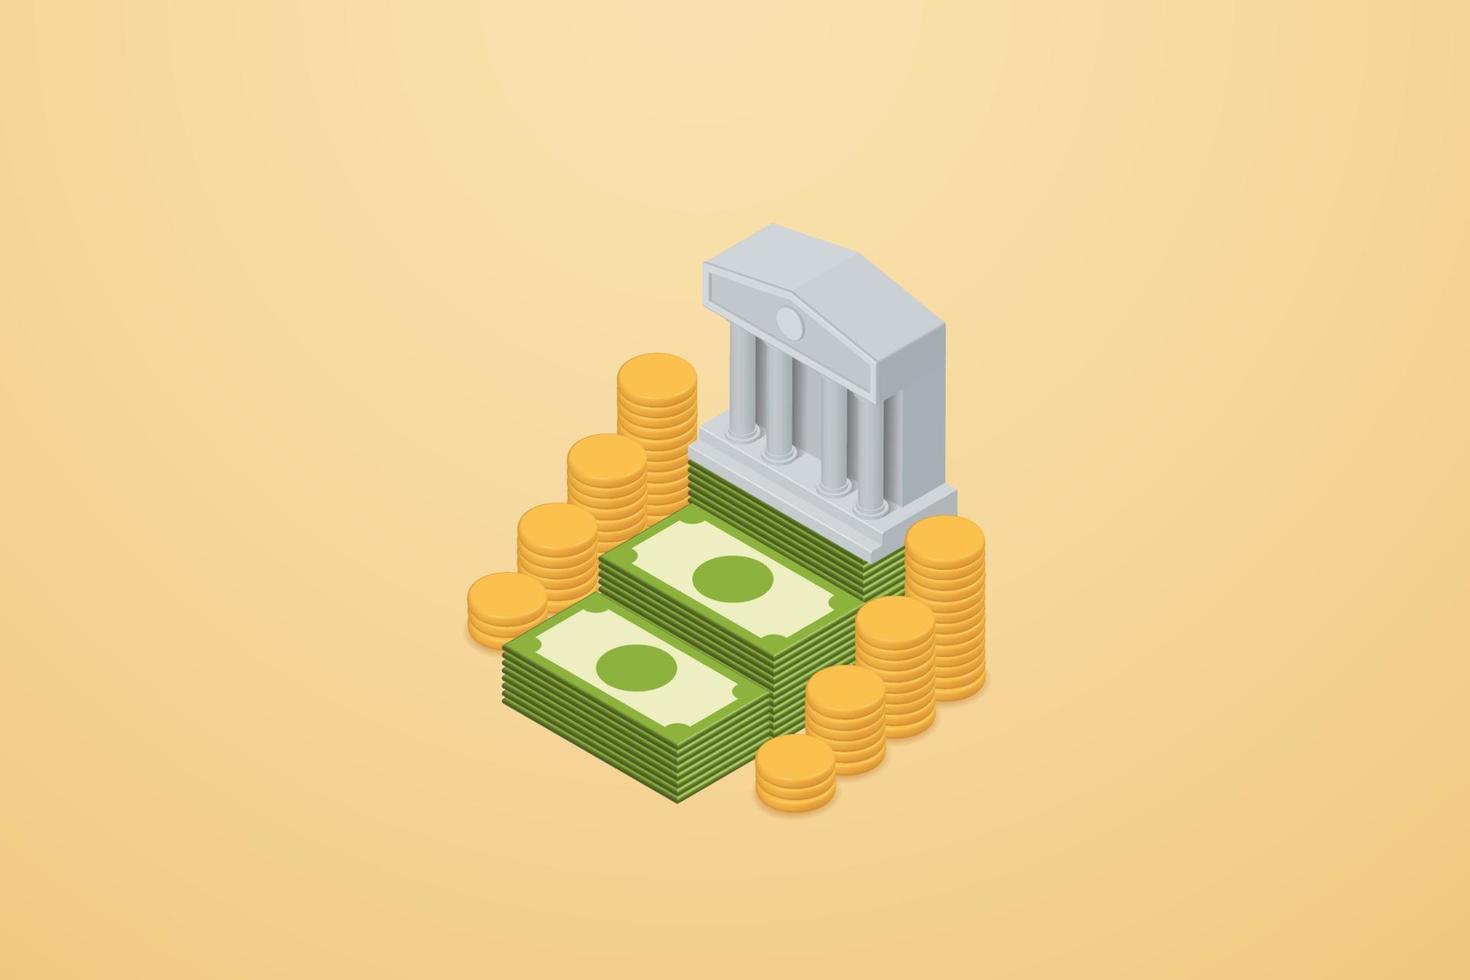 Bank building on icon paper banknotes with coins vector